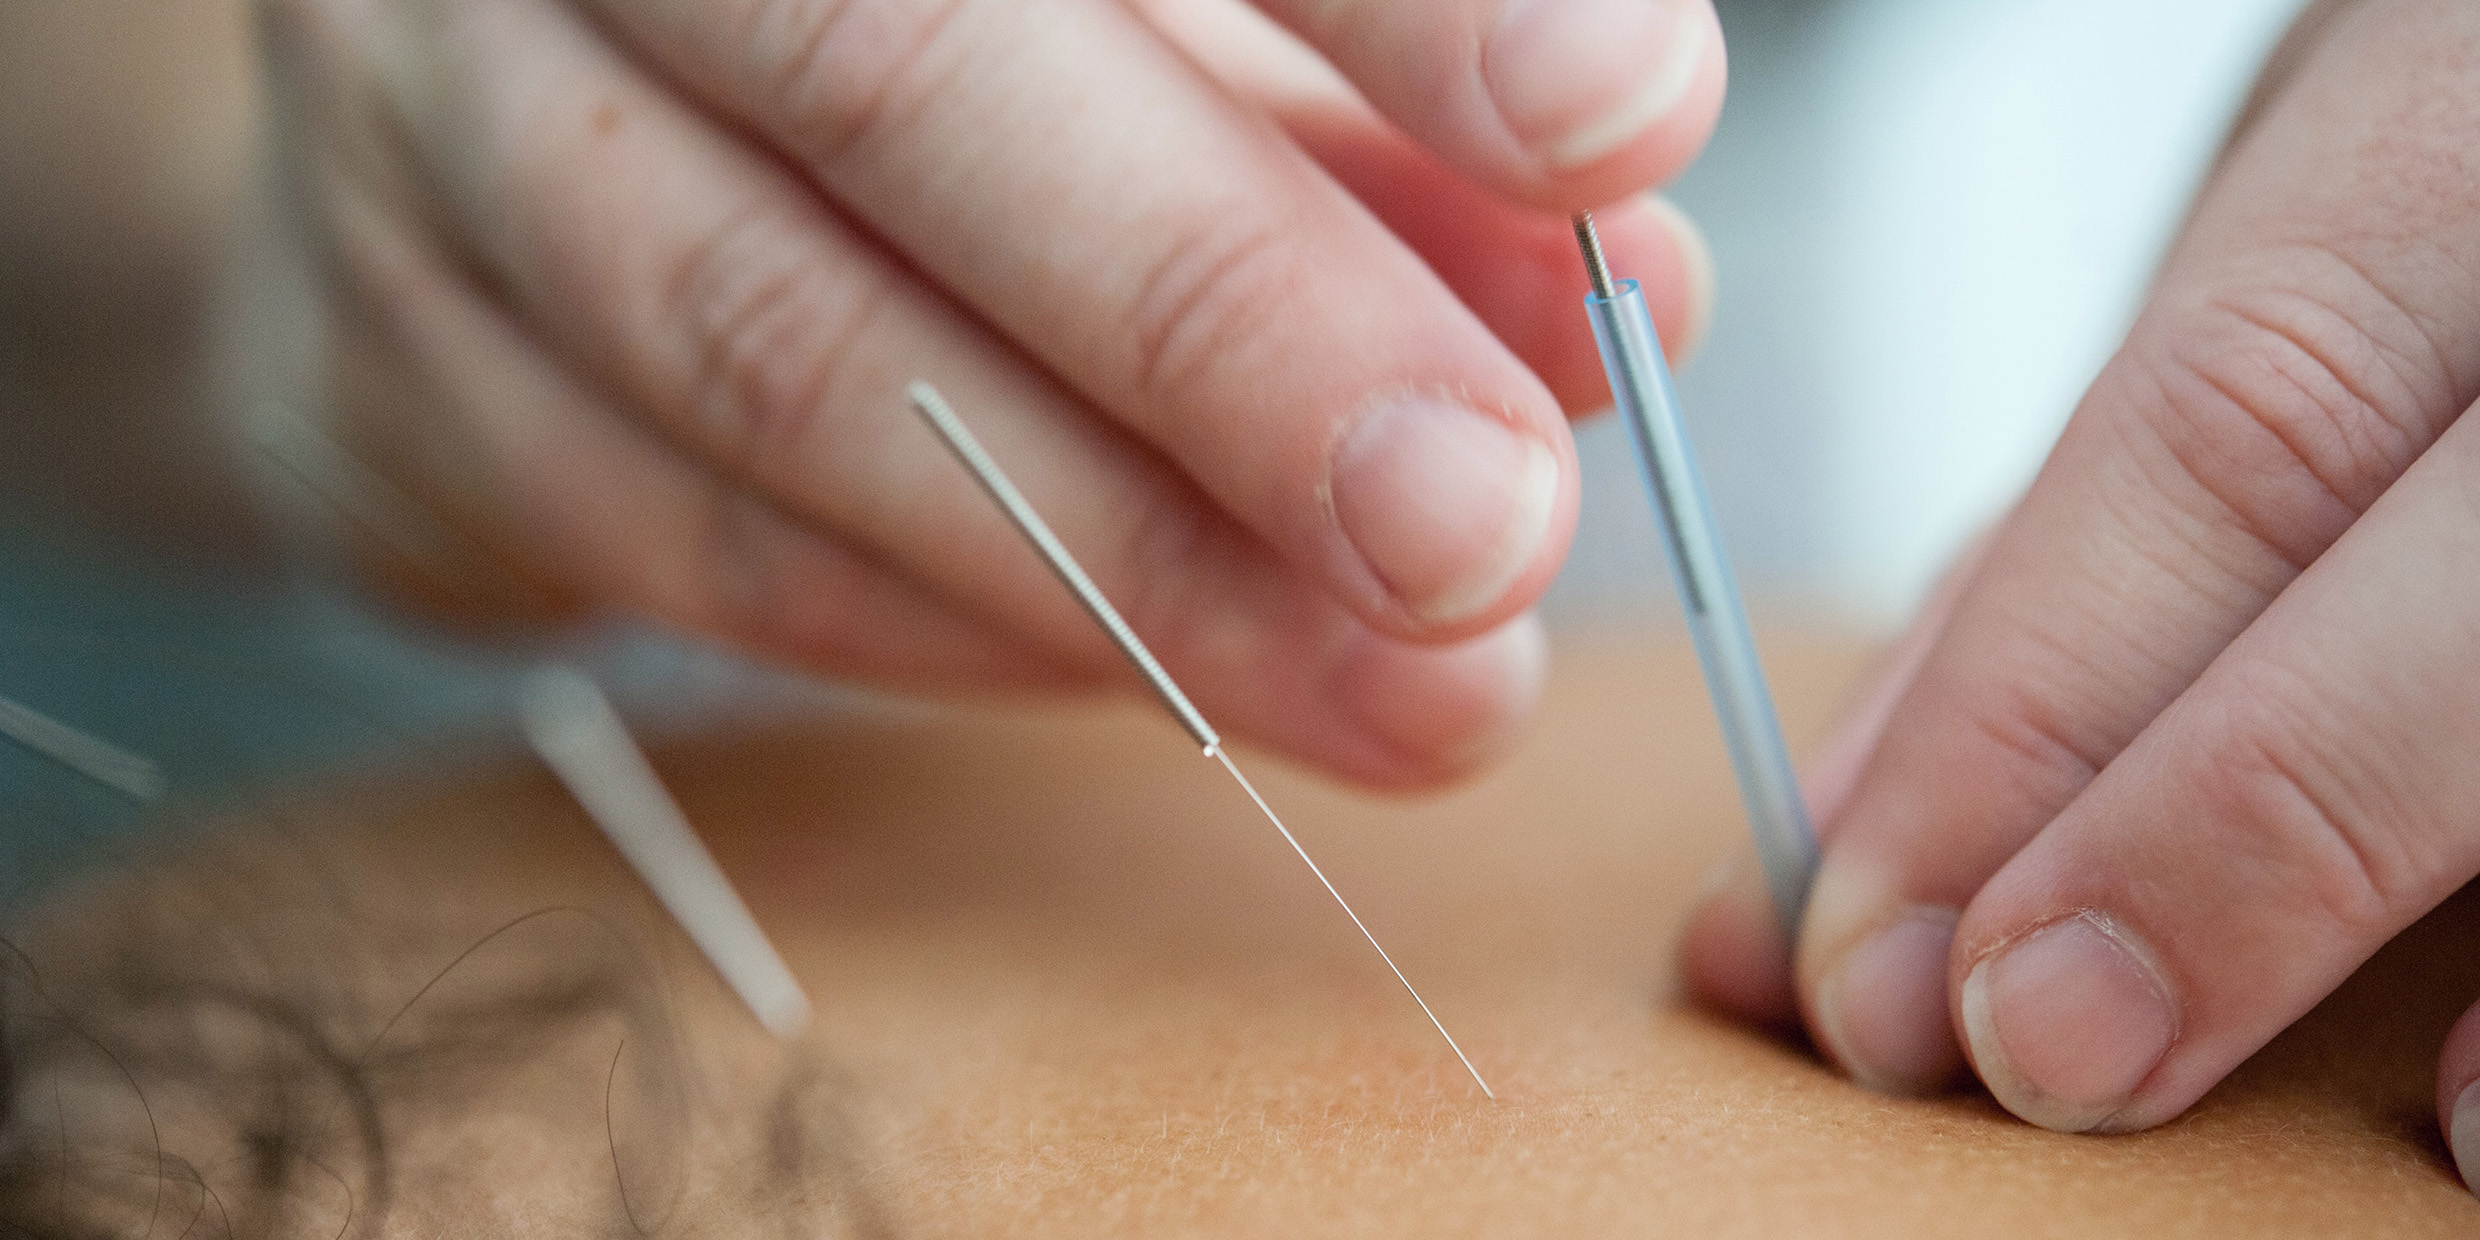 Close-up image of acupuncture needles being applied to a patient